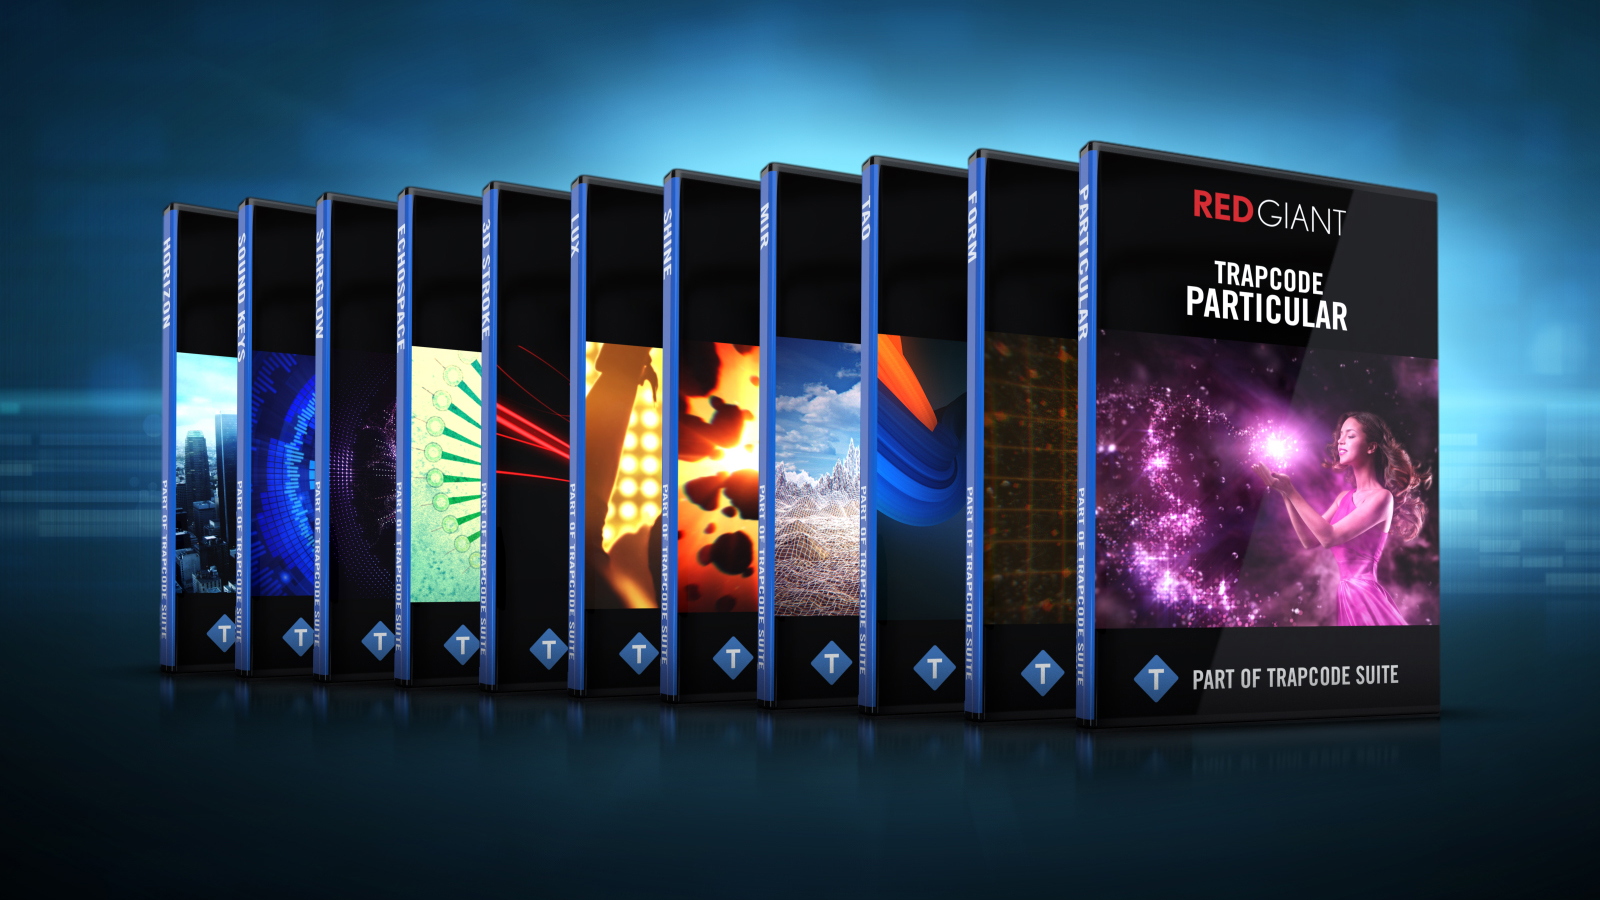 red giant trapcode suite 15.0.1